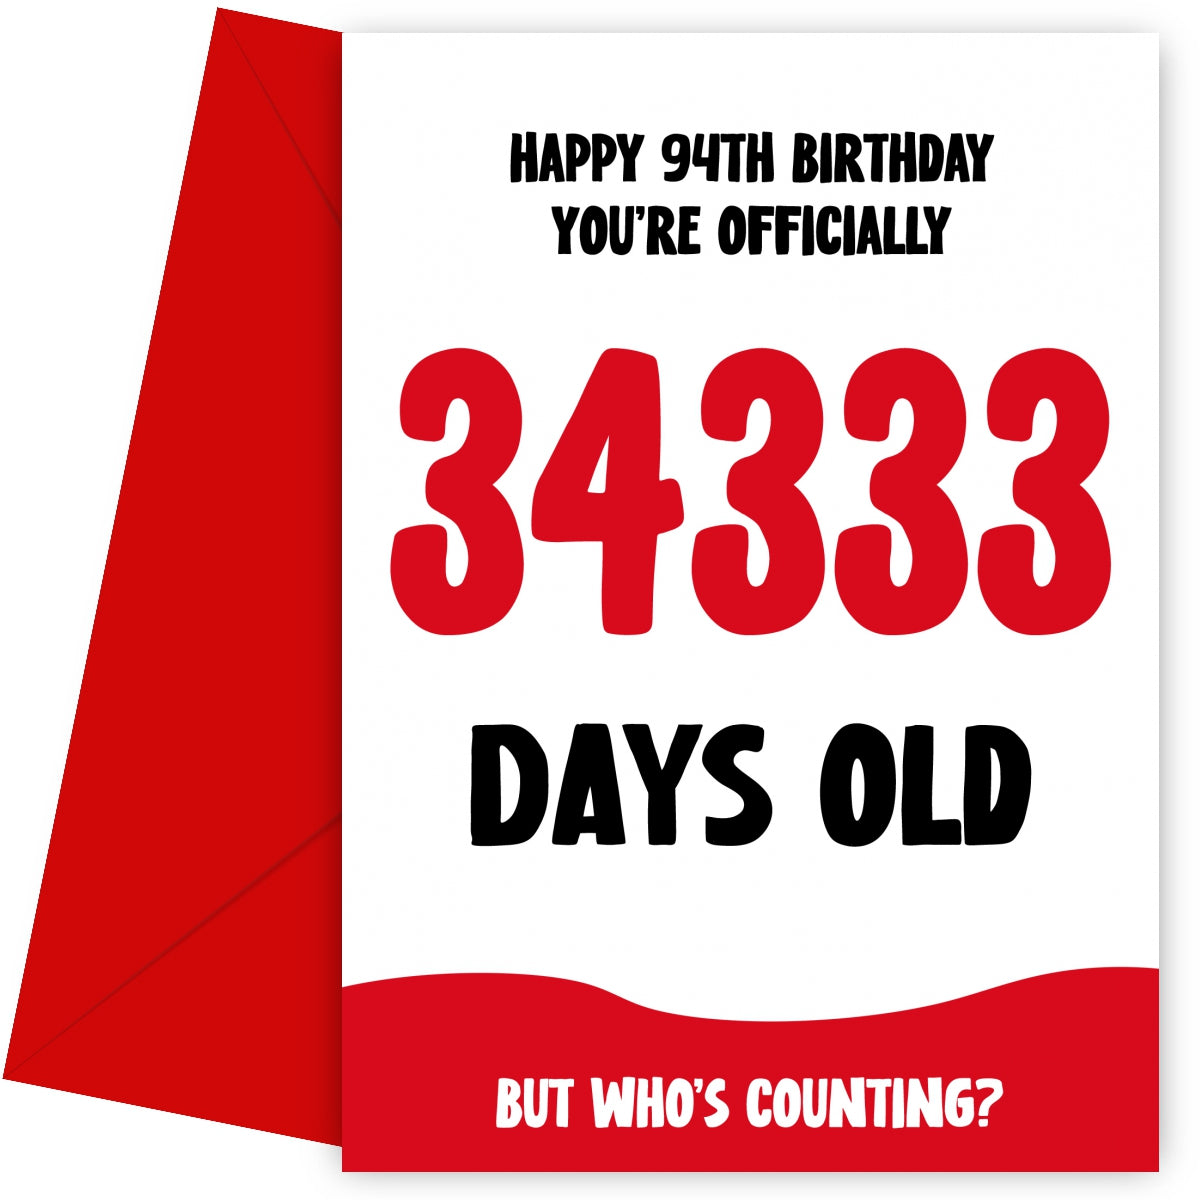 Funny 94th Birthday Card for Men and Women - 34333 Days Old